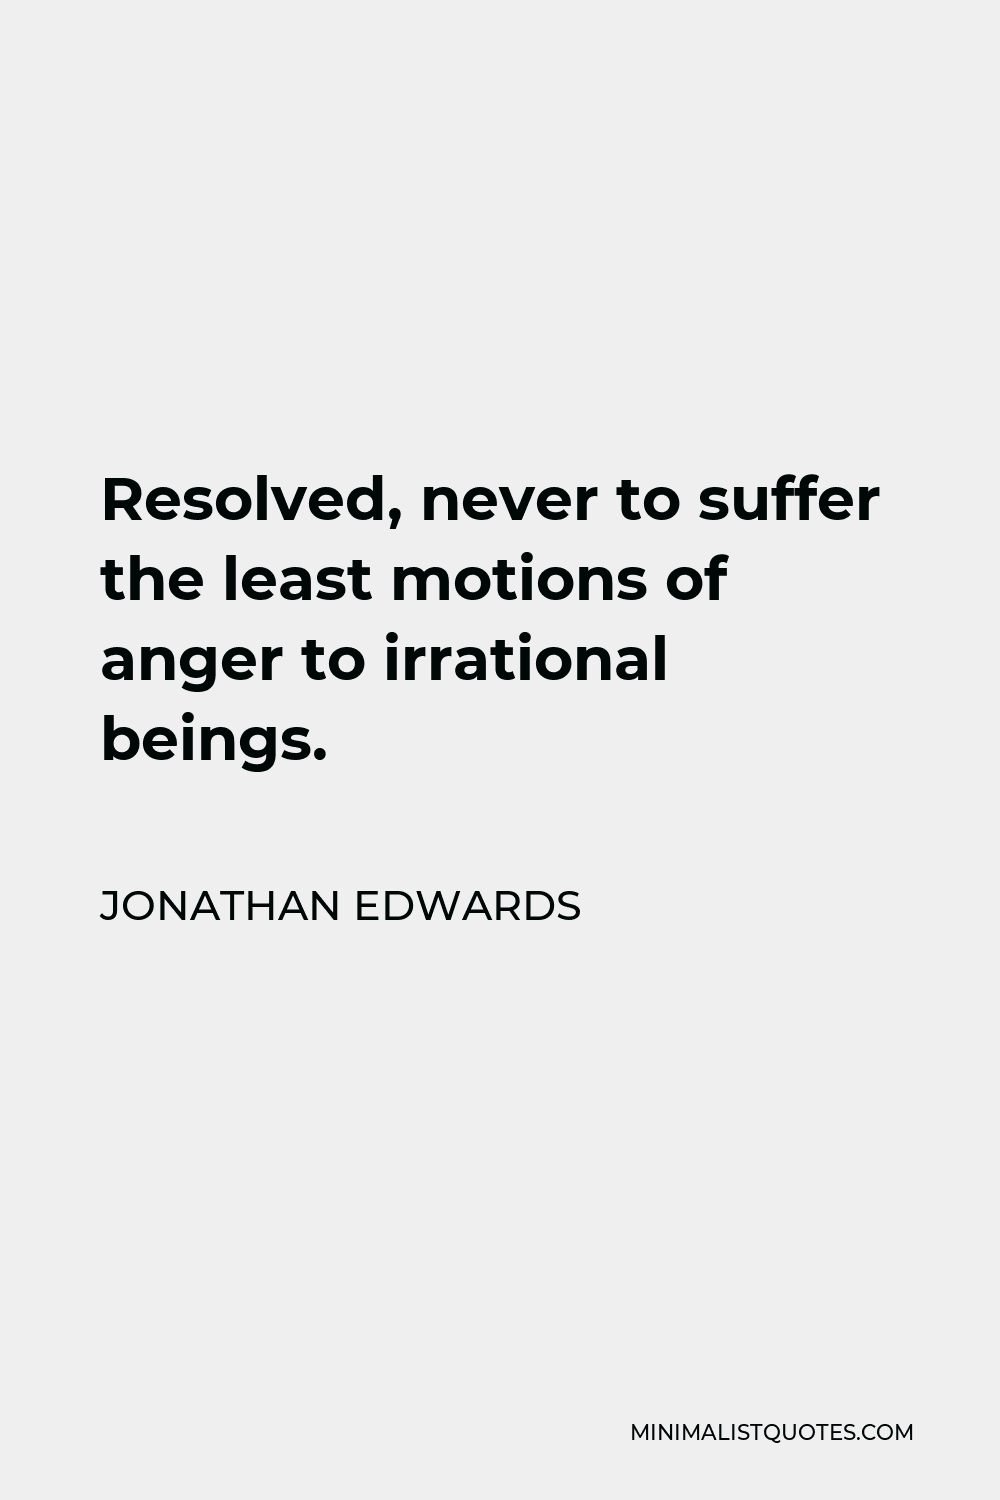 Jonathan Edwards Quote - Resolved, never to suffer the least motions of anger to irrational beings.